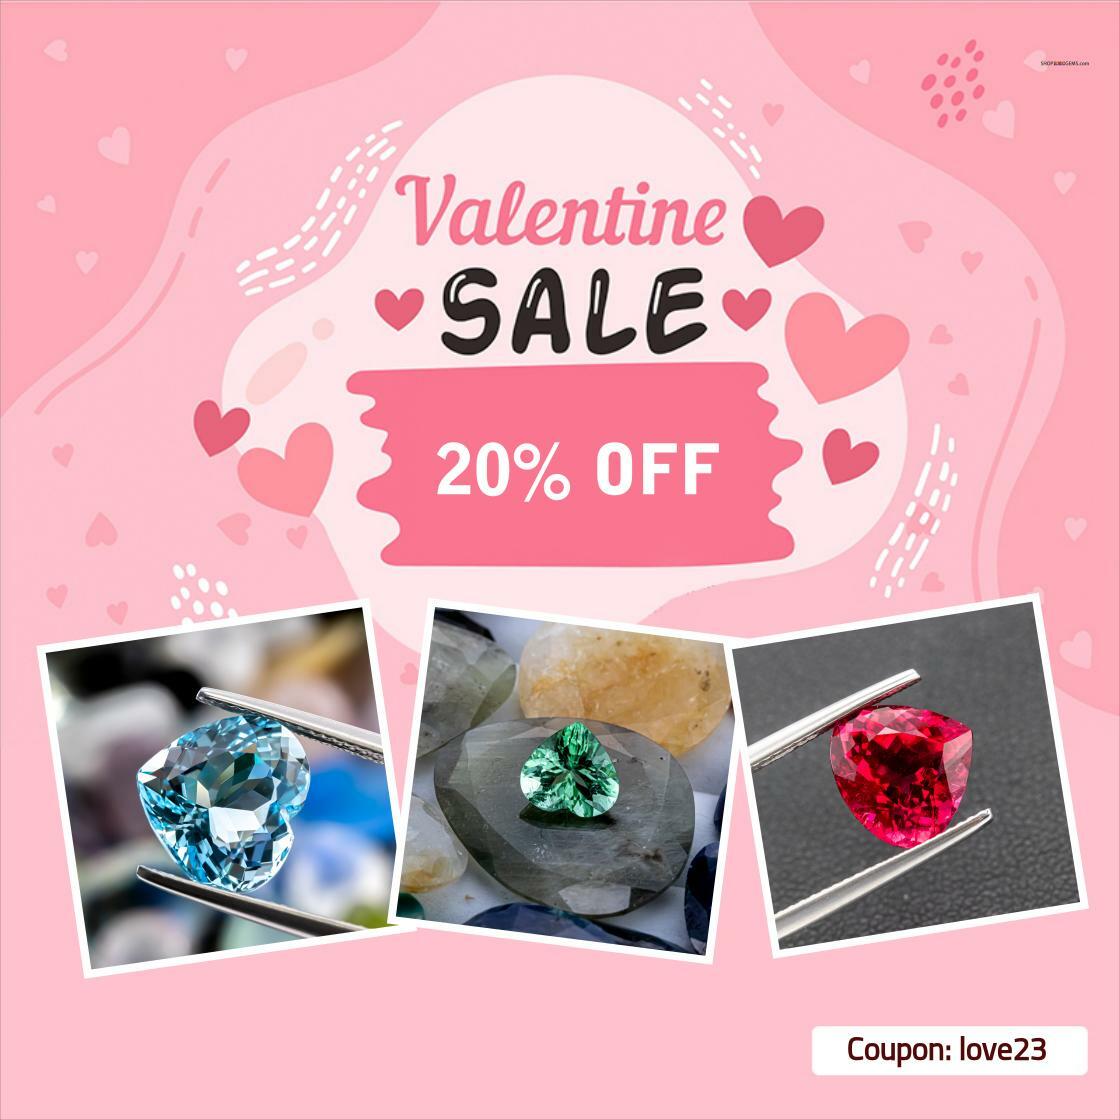 Last Minute Valentines Day Shopping? Get 20% OFF at shoprmcgems.com